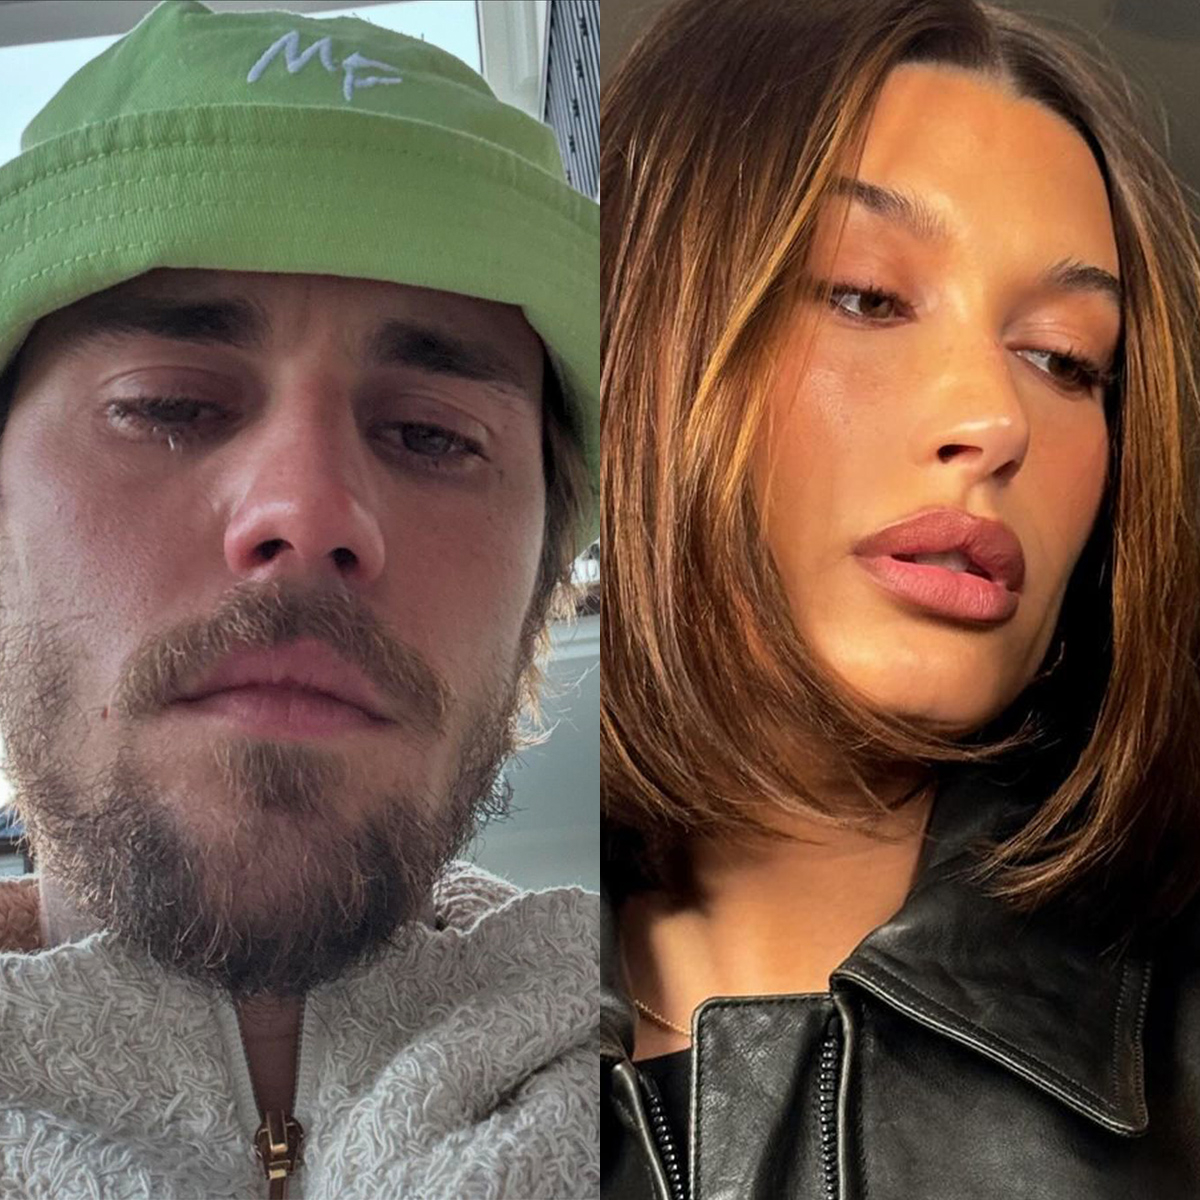 Hailey Bieber's Supportive Comment on Husband Justin Bieber's Tearful Photos: 